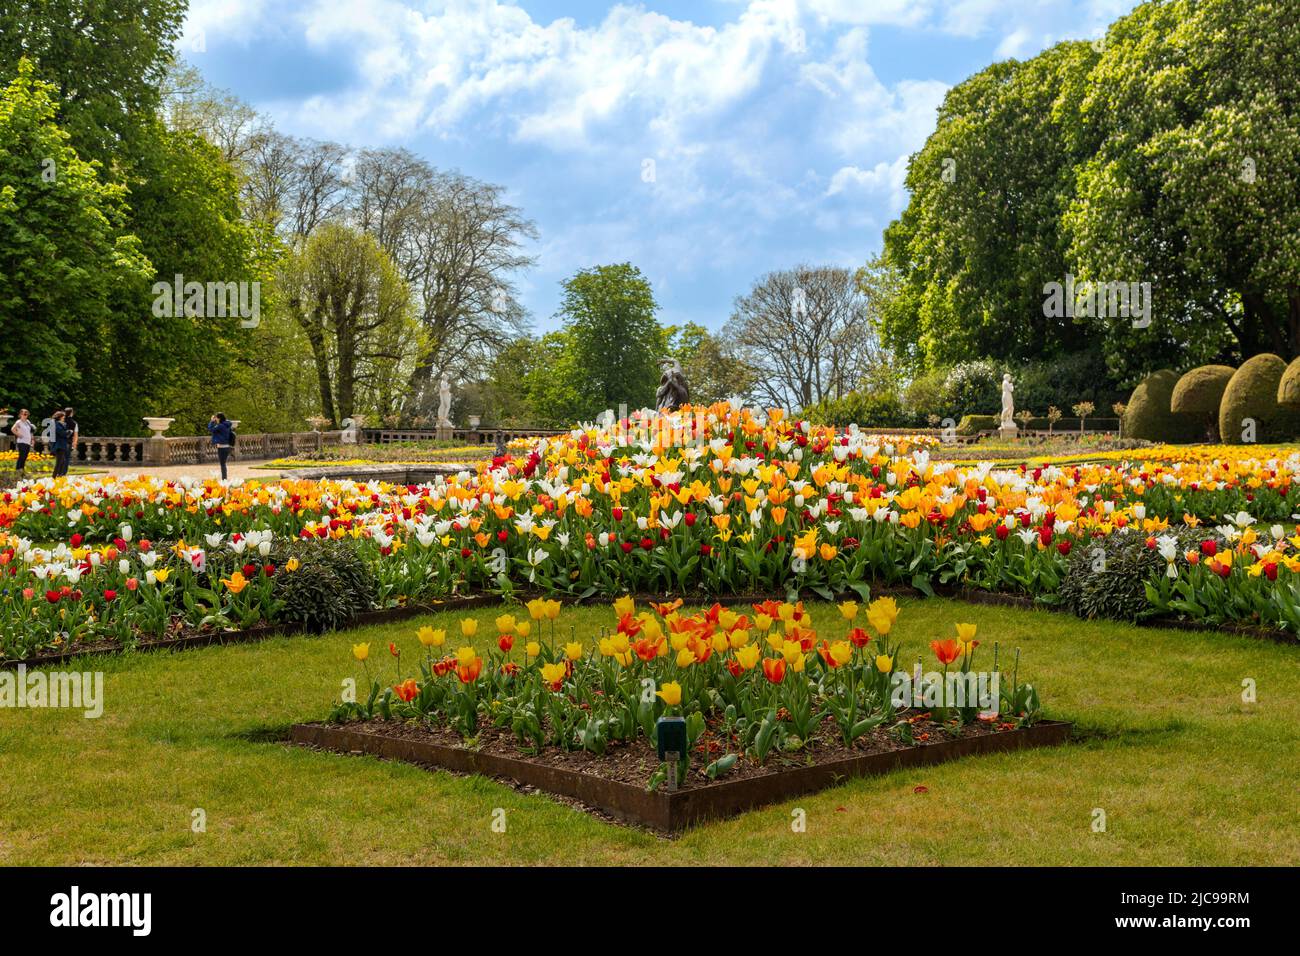 Landscaped flowerbeds with flowering tulips in spring in the parterre garden at Waddesdon Manor, Ayelesbury, Buckinghamshire, England, UK. Stock Photo